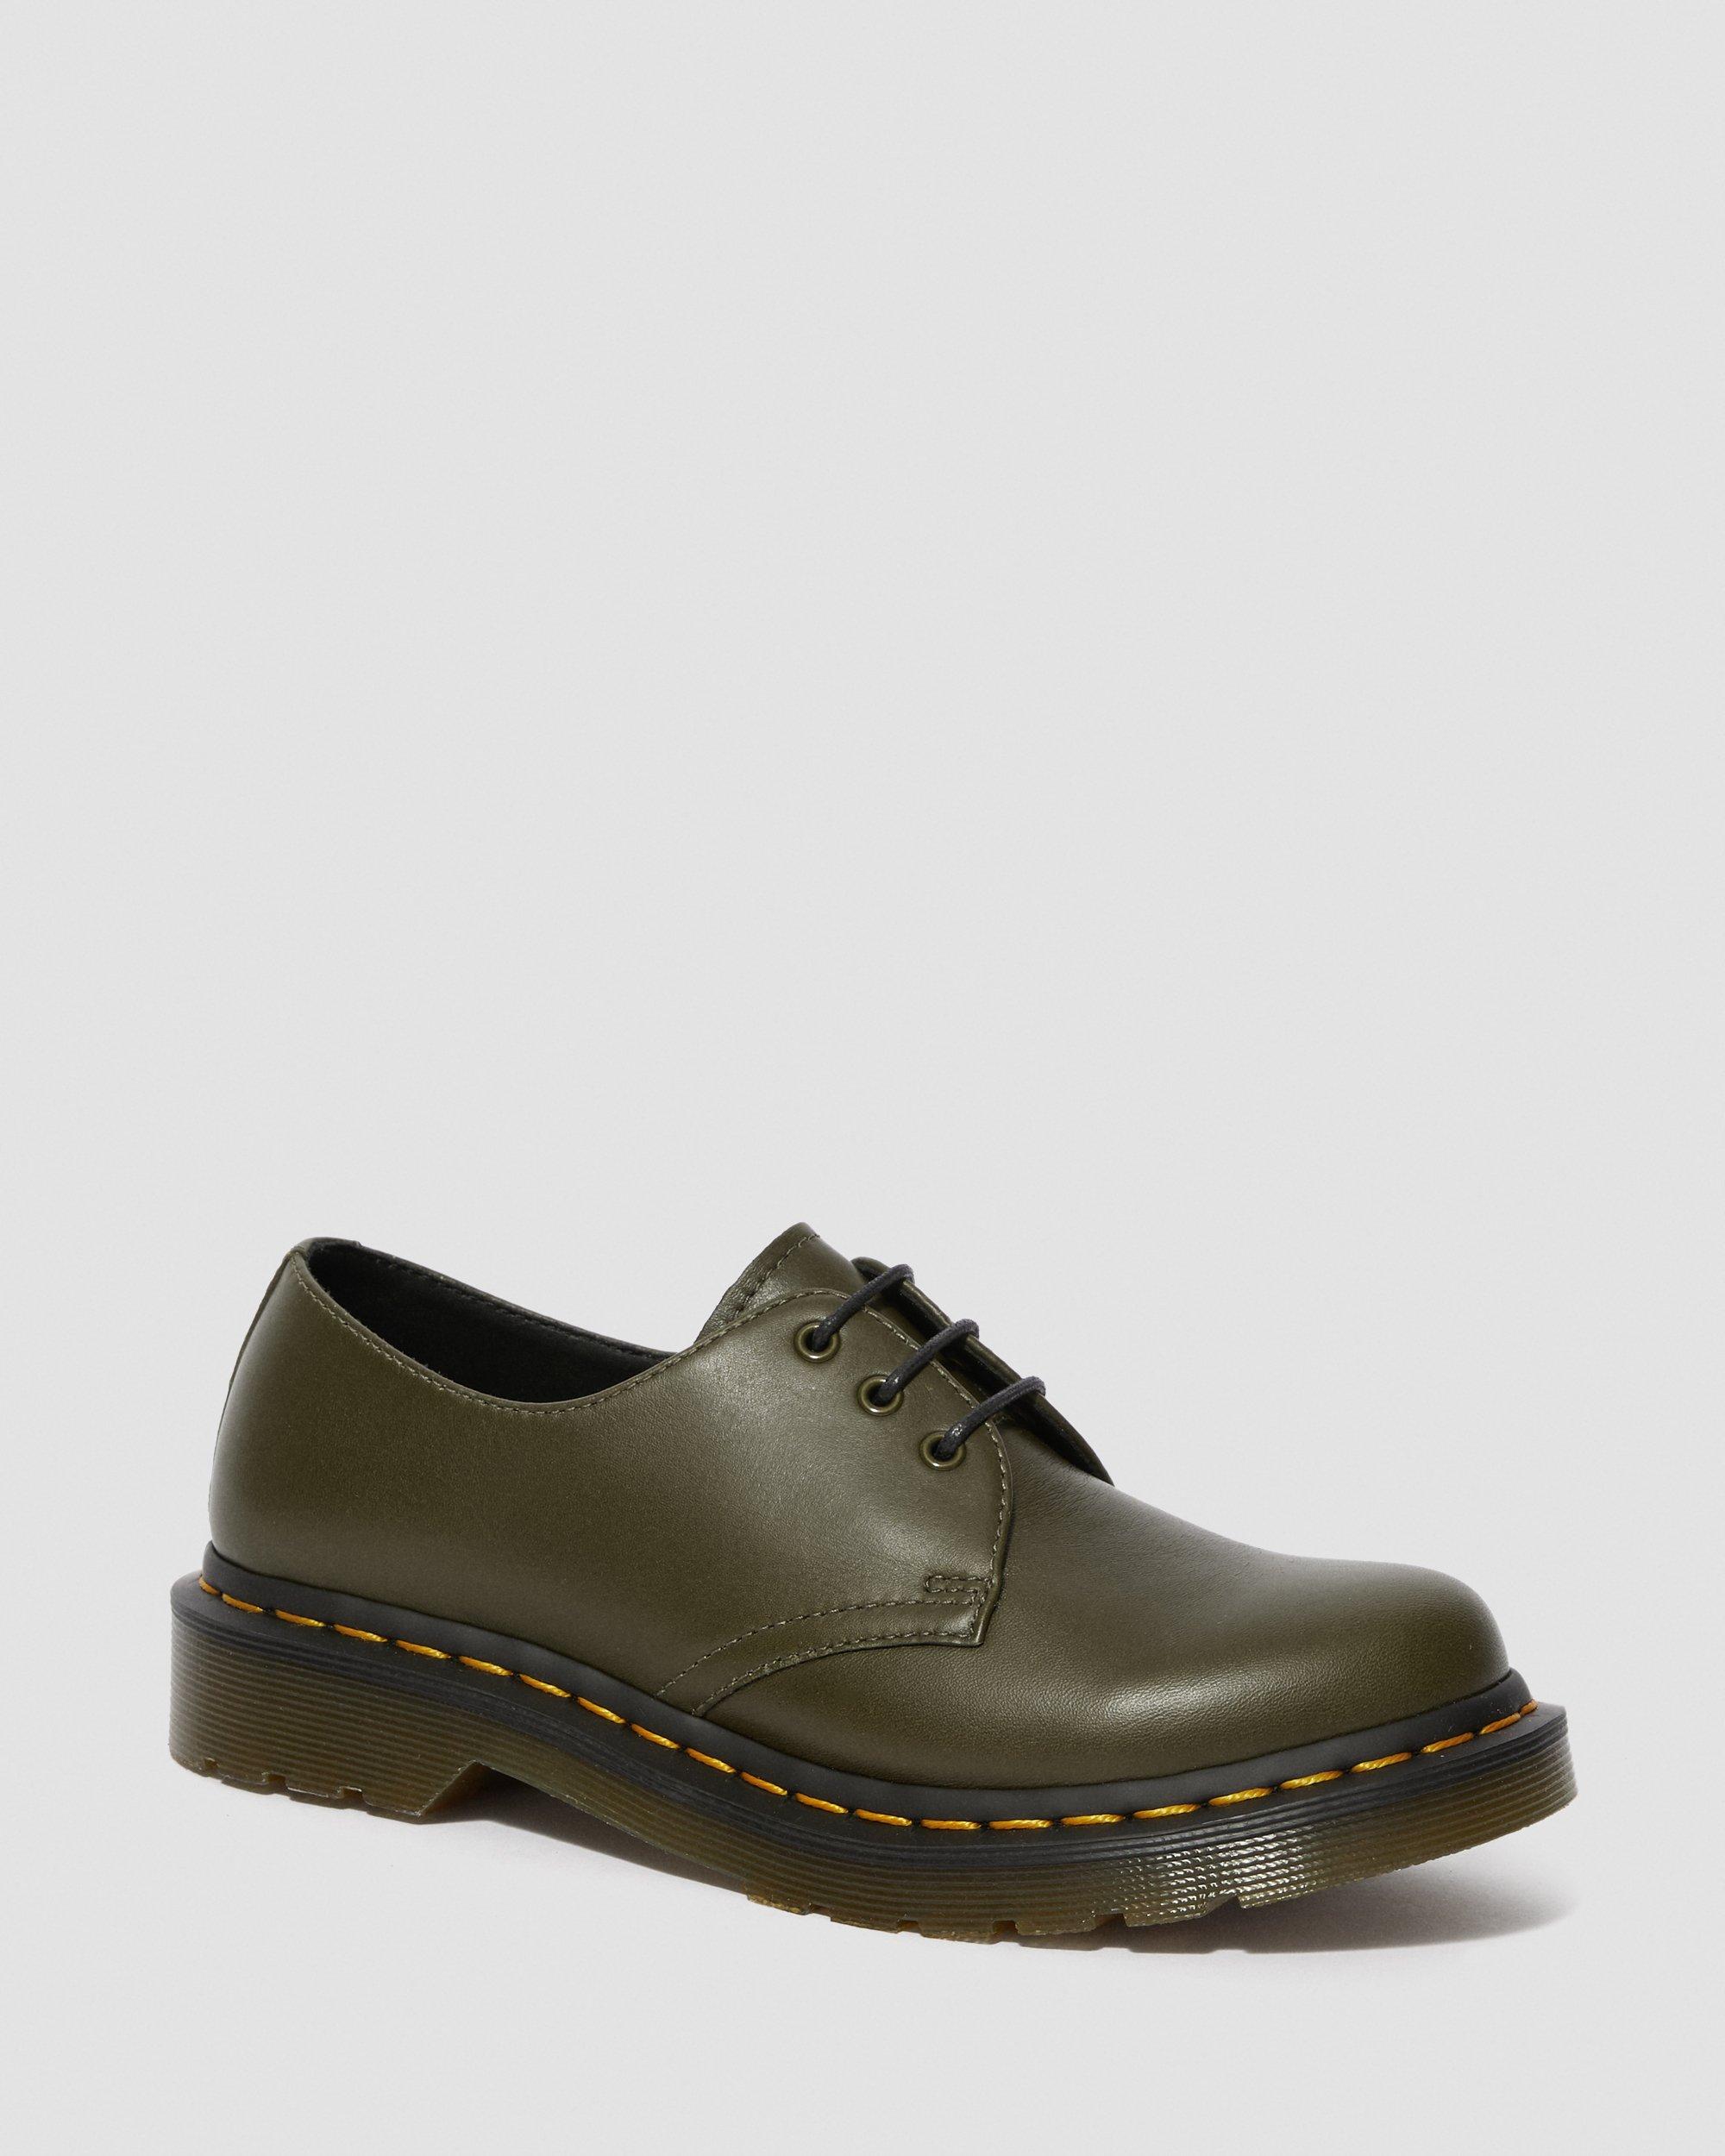 Women's Wanama Leather Oxford in Olive | Dr. Martens